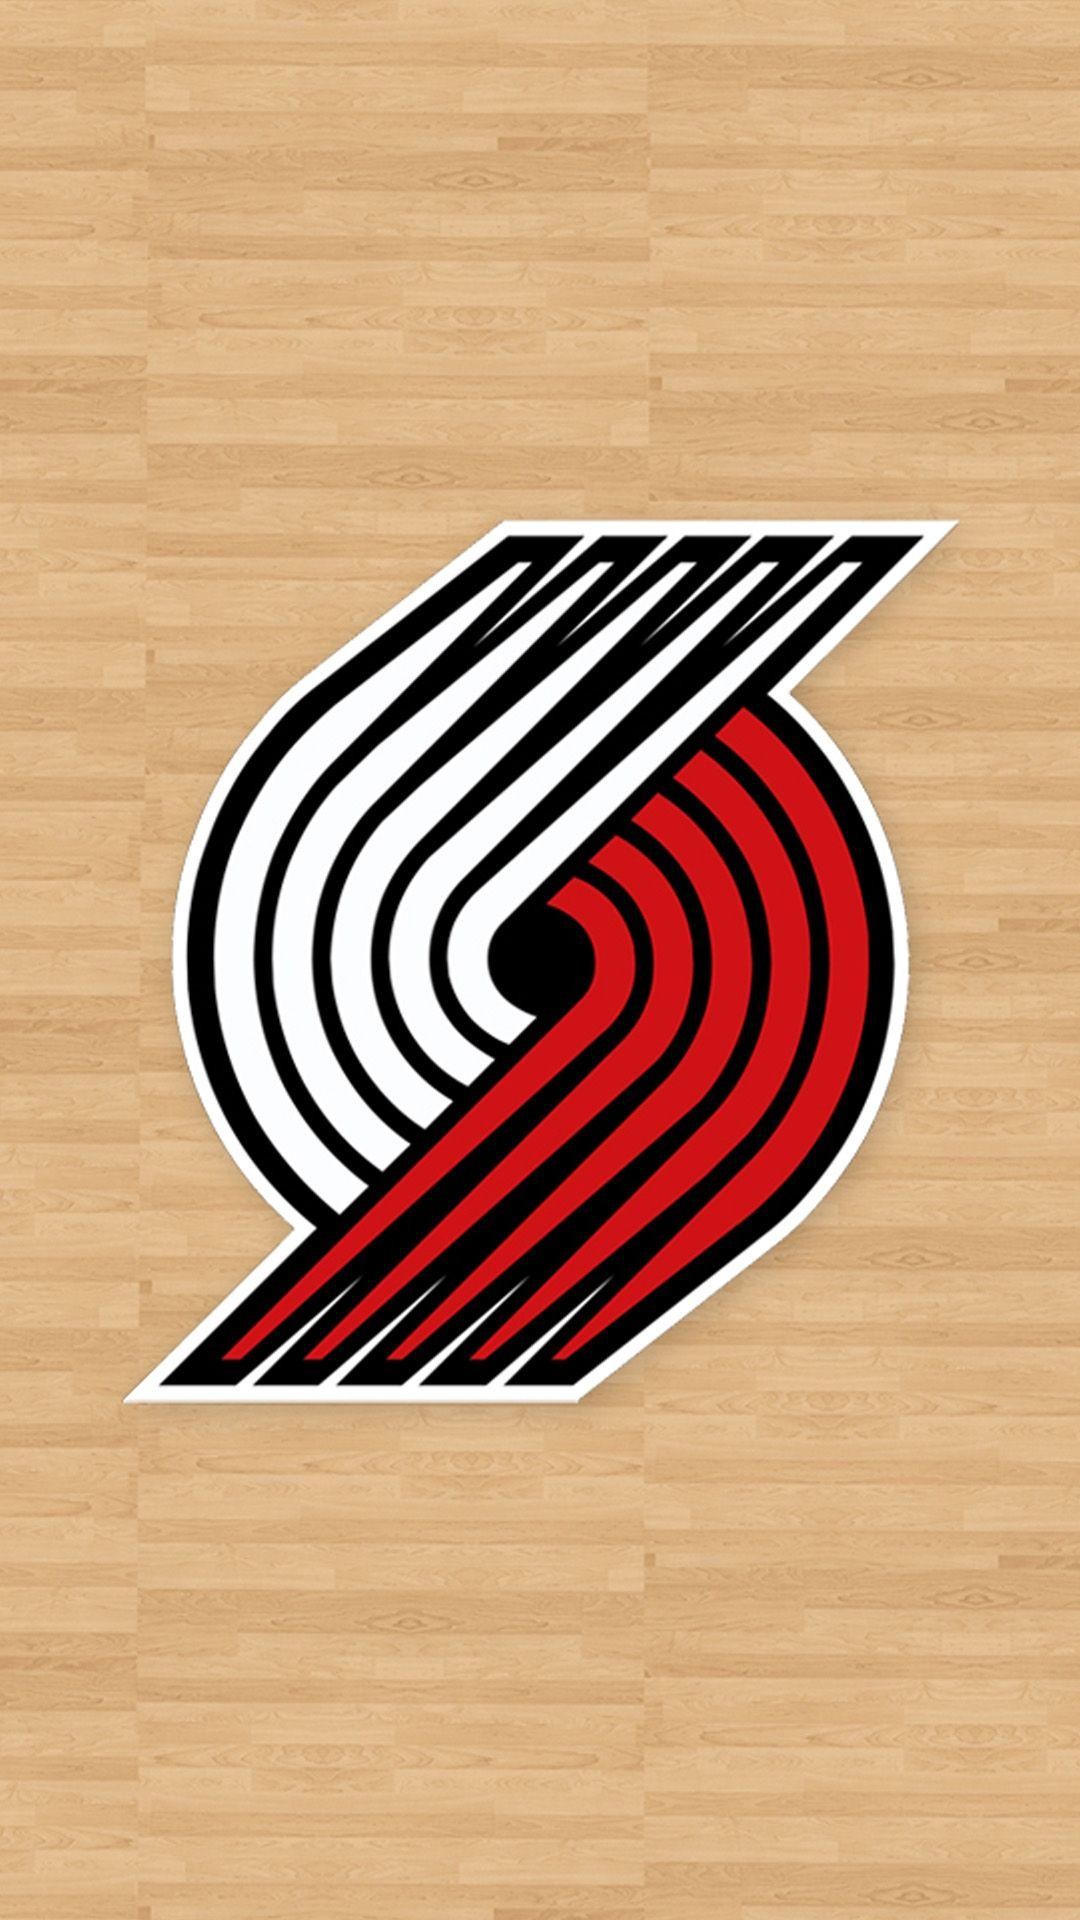 1080x1920 Portland Trail Blazers Wallpapers for Iphone 7, Iphone 7 plus .